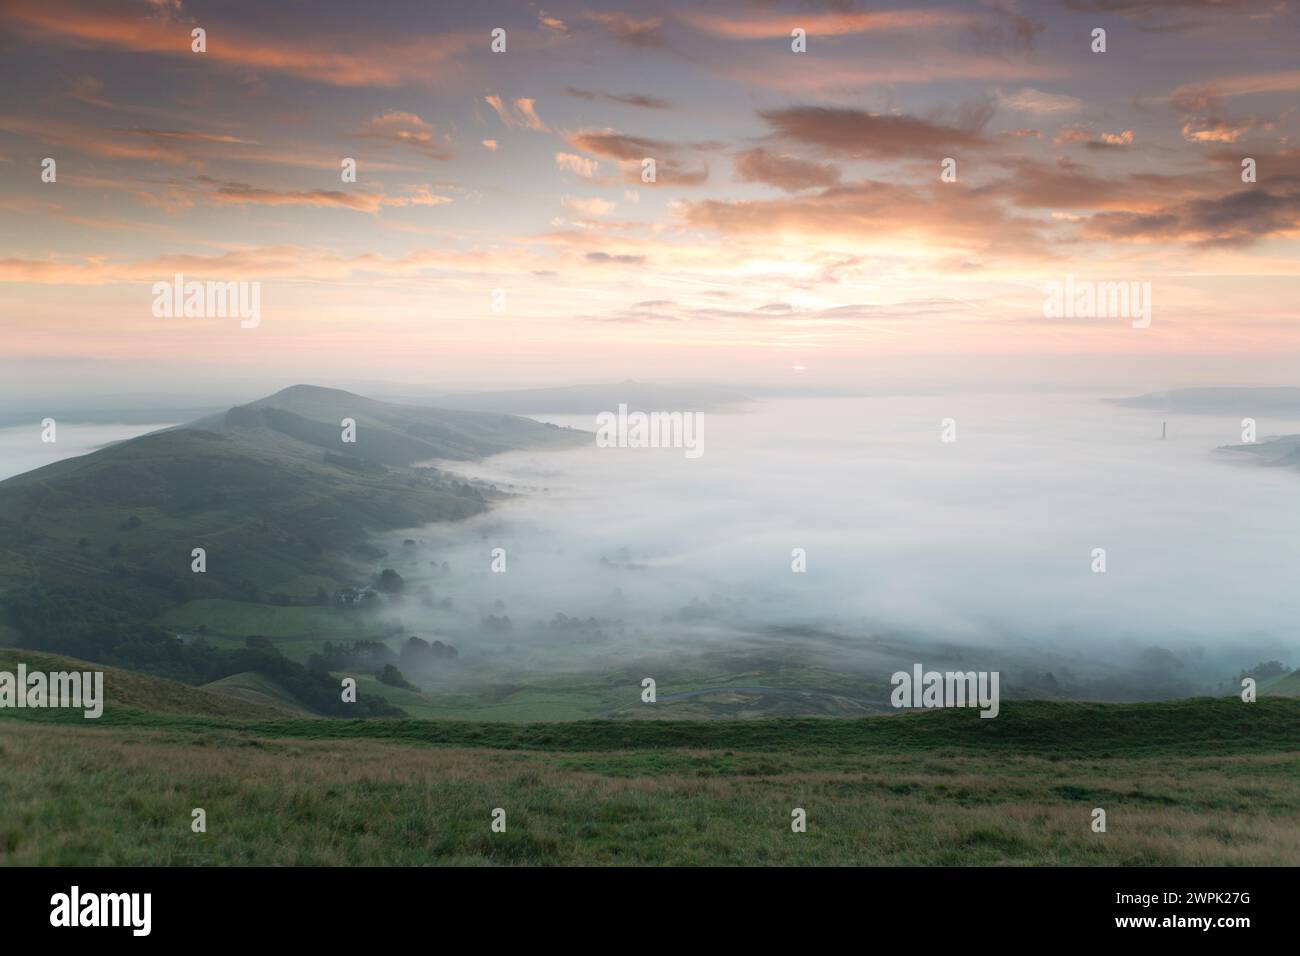 UK, Peak District, sunrise view from Mam Tor looking down the Hope Valley near Castleton and edale. Stock Photo